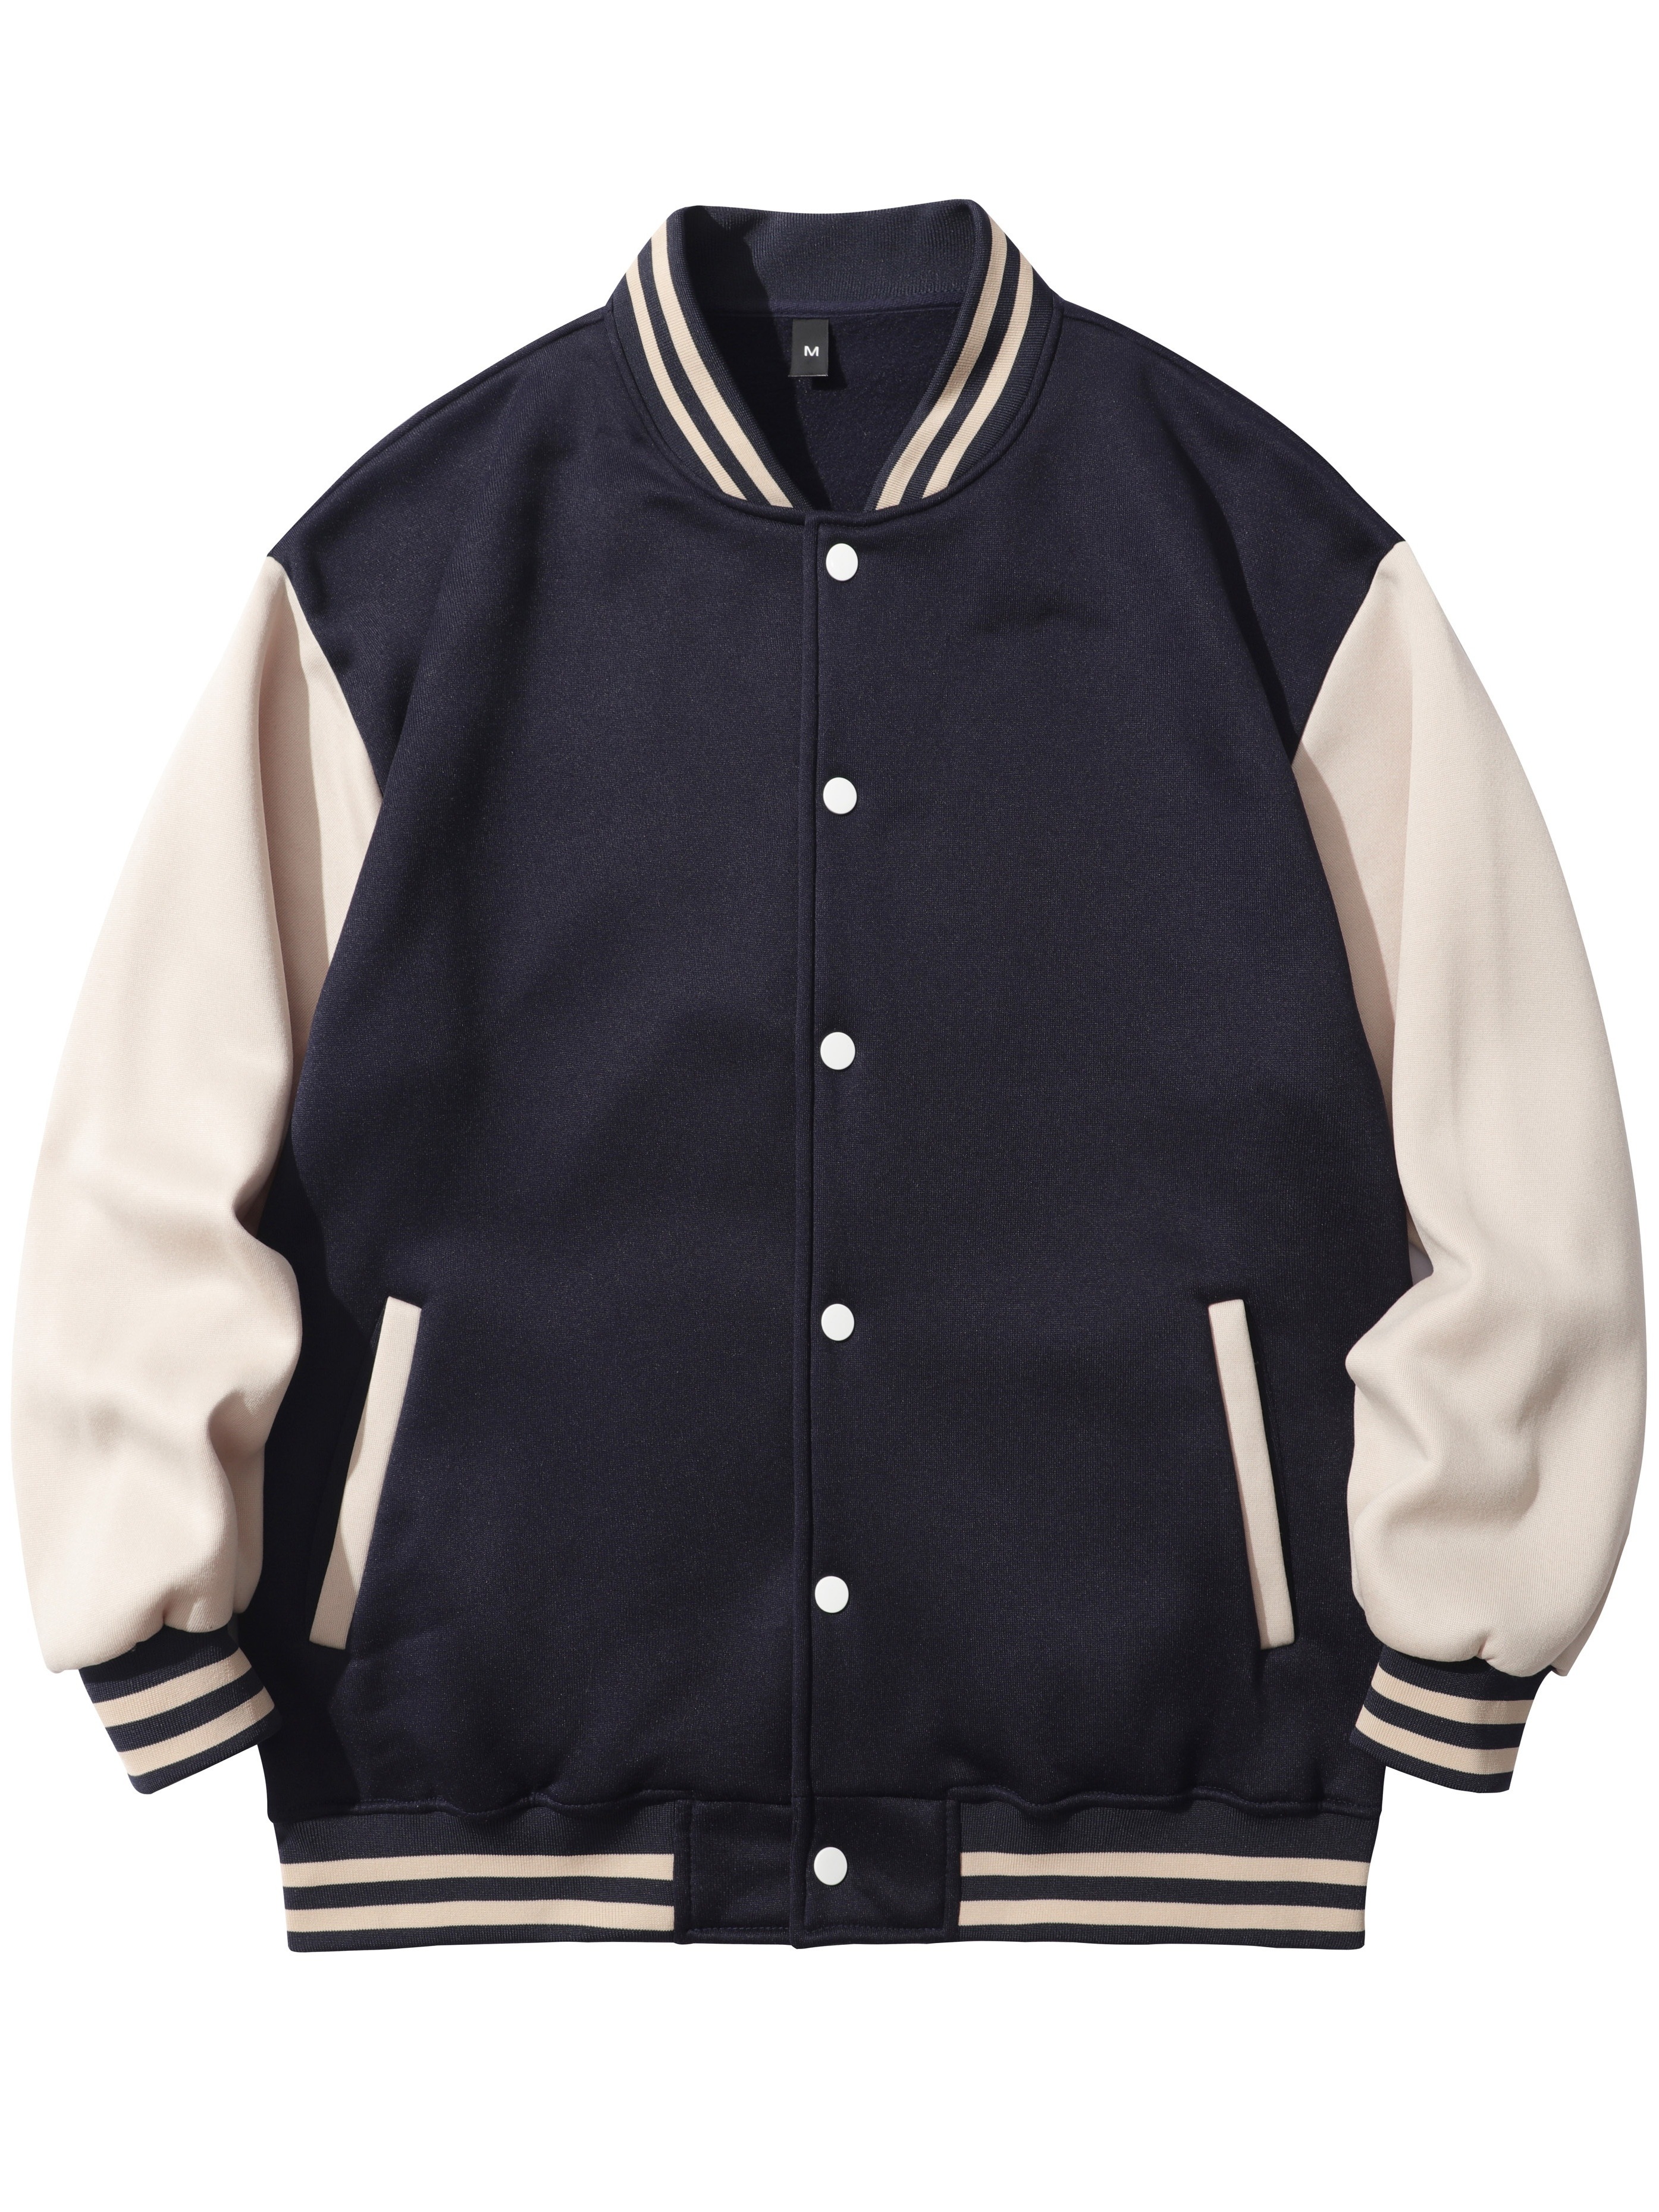 classic design varsity jacket mens casual color block button up jacket for spring fall school baseball details 12